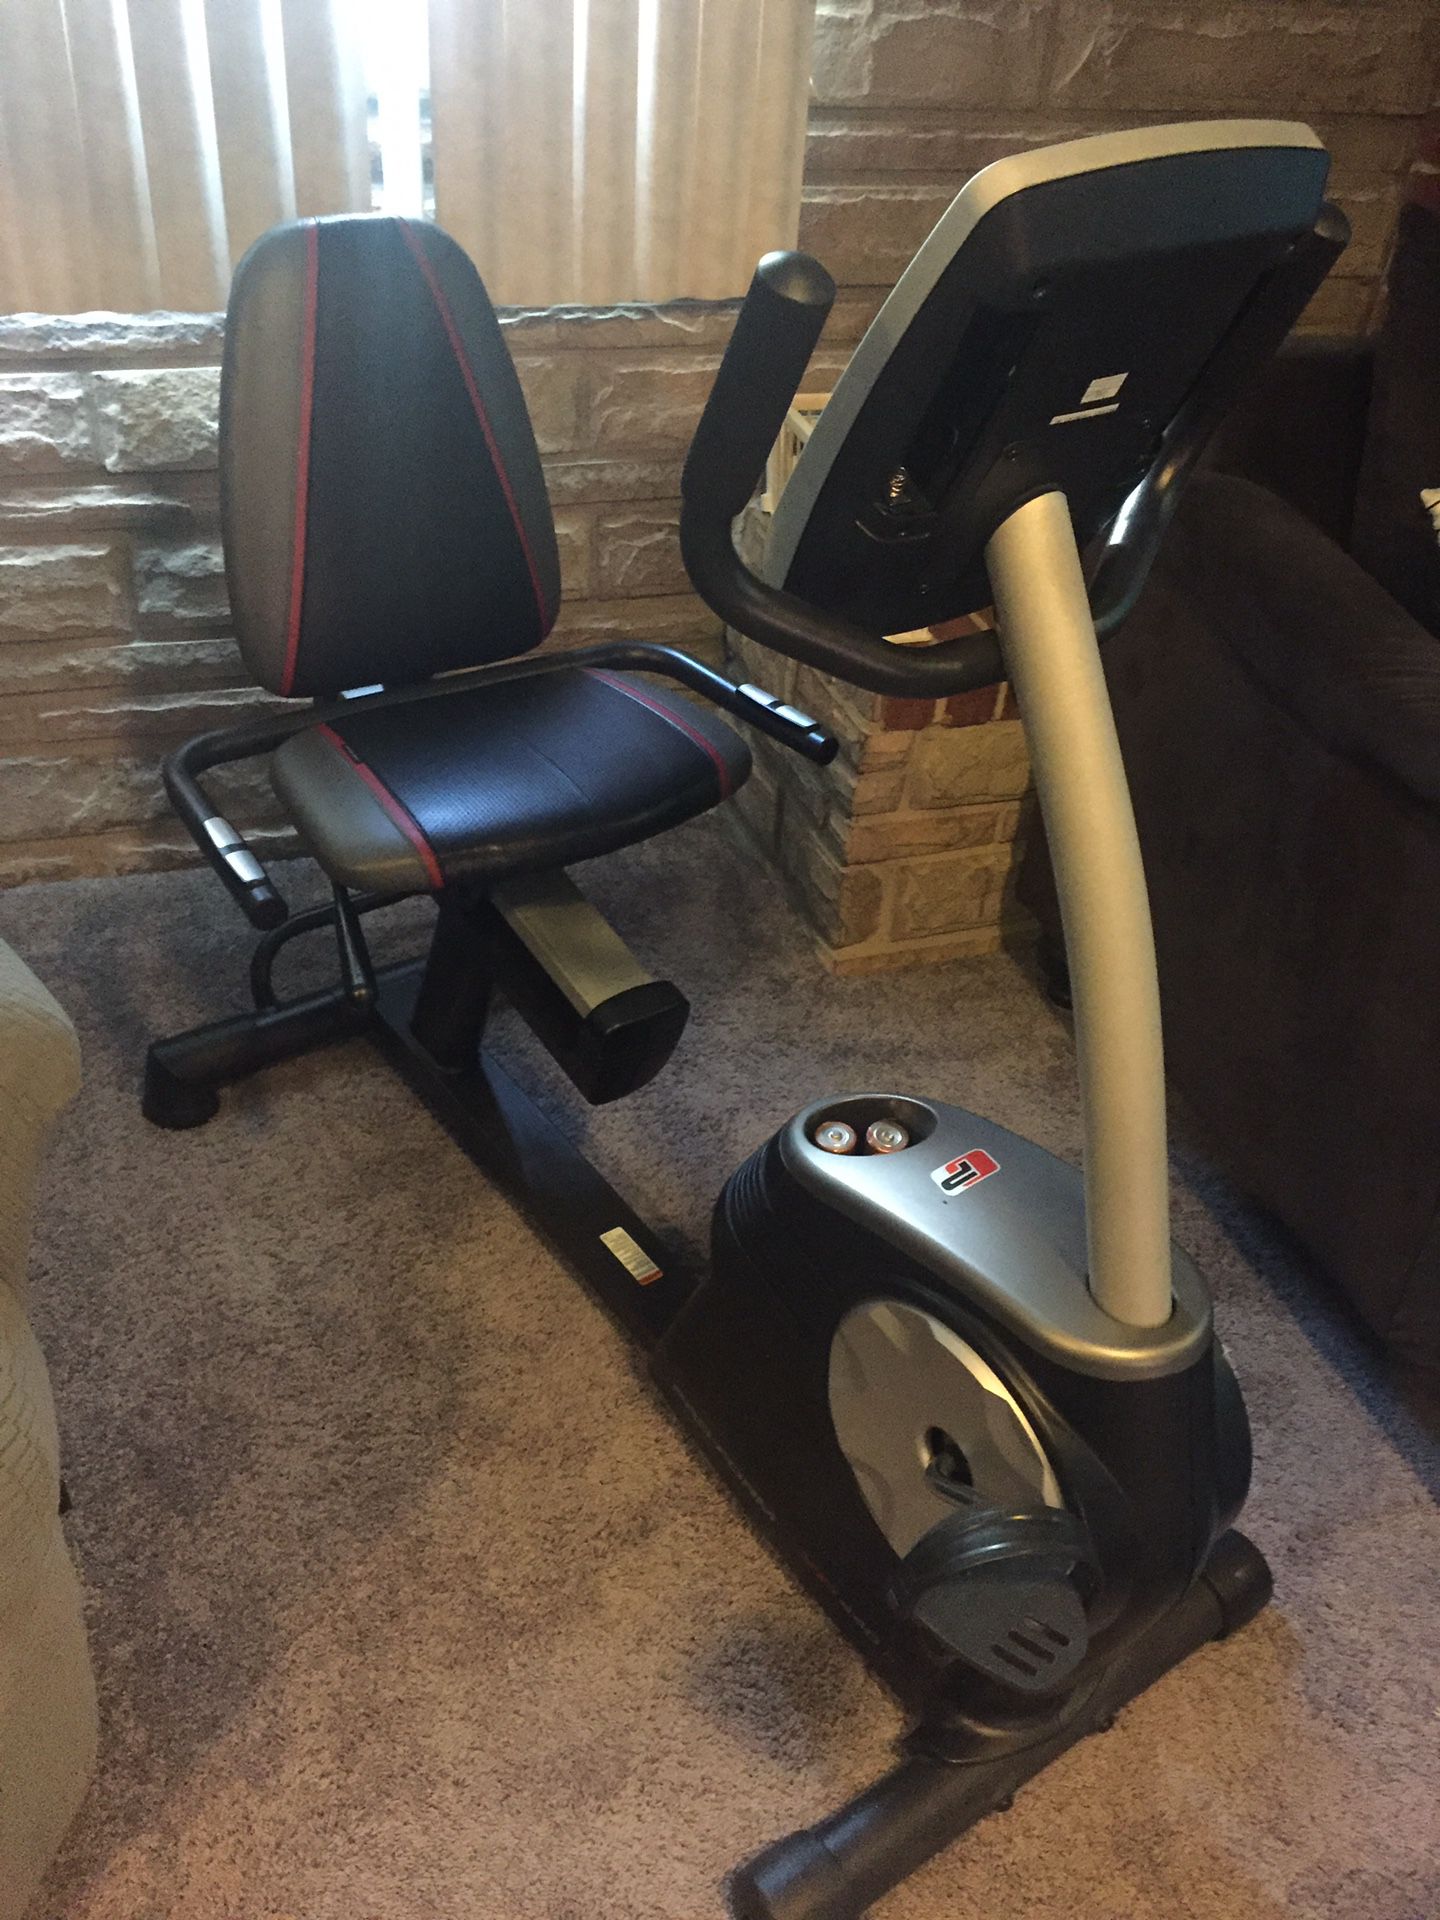 Stationary Exercise Bike by Proform